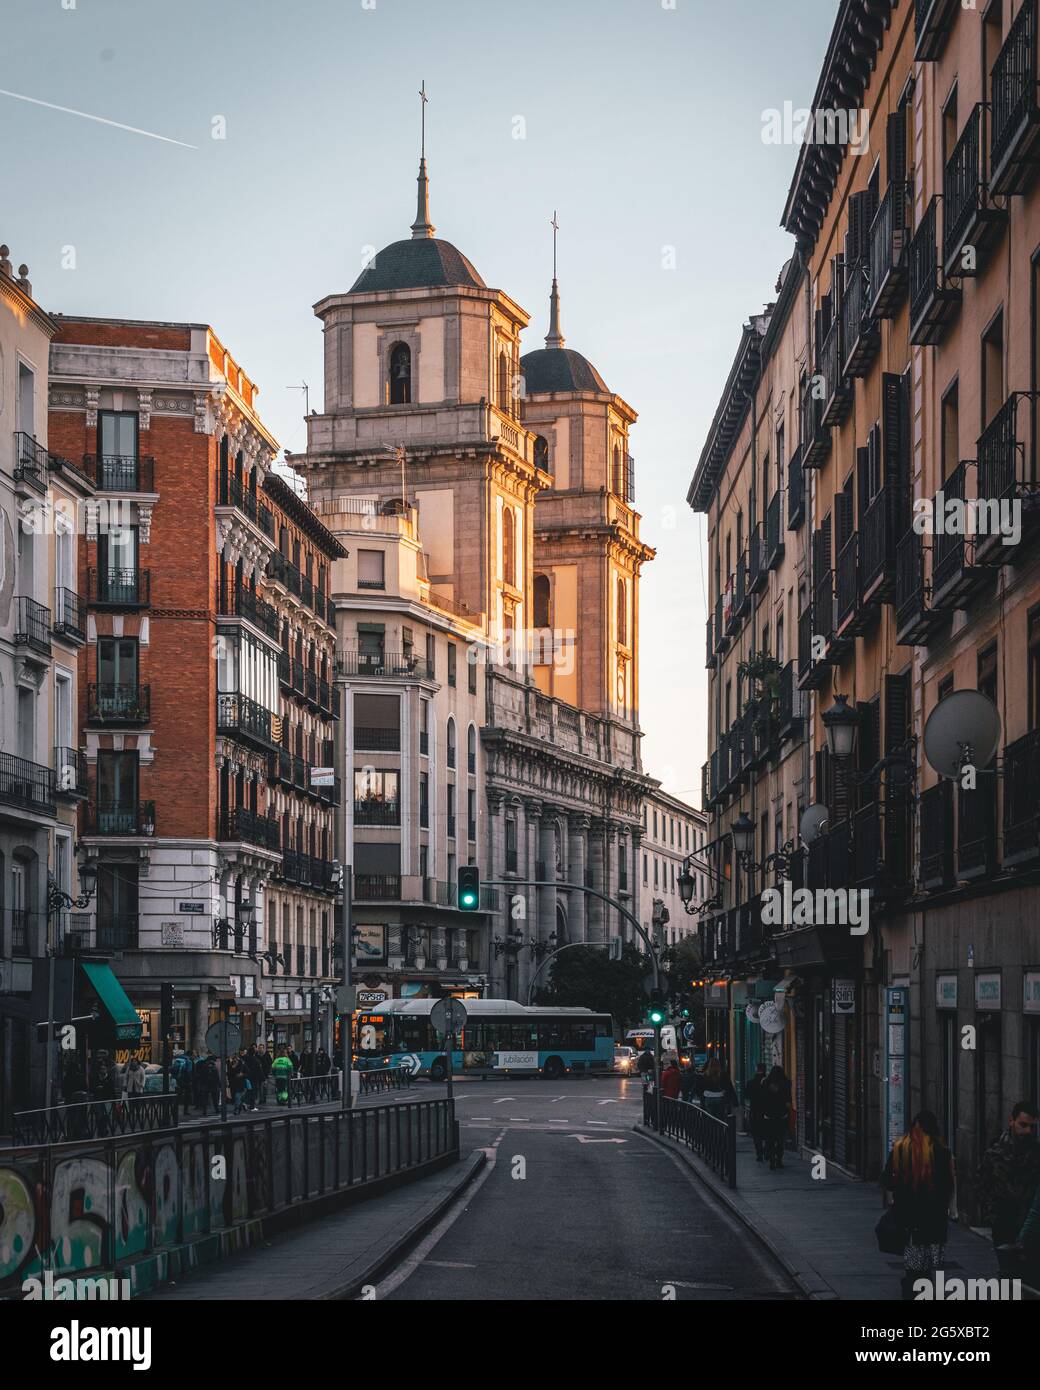 A city street with historic buildings and a church, Madrid, Spain Stock Photo